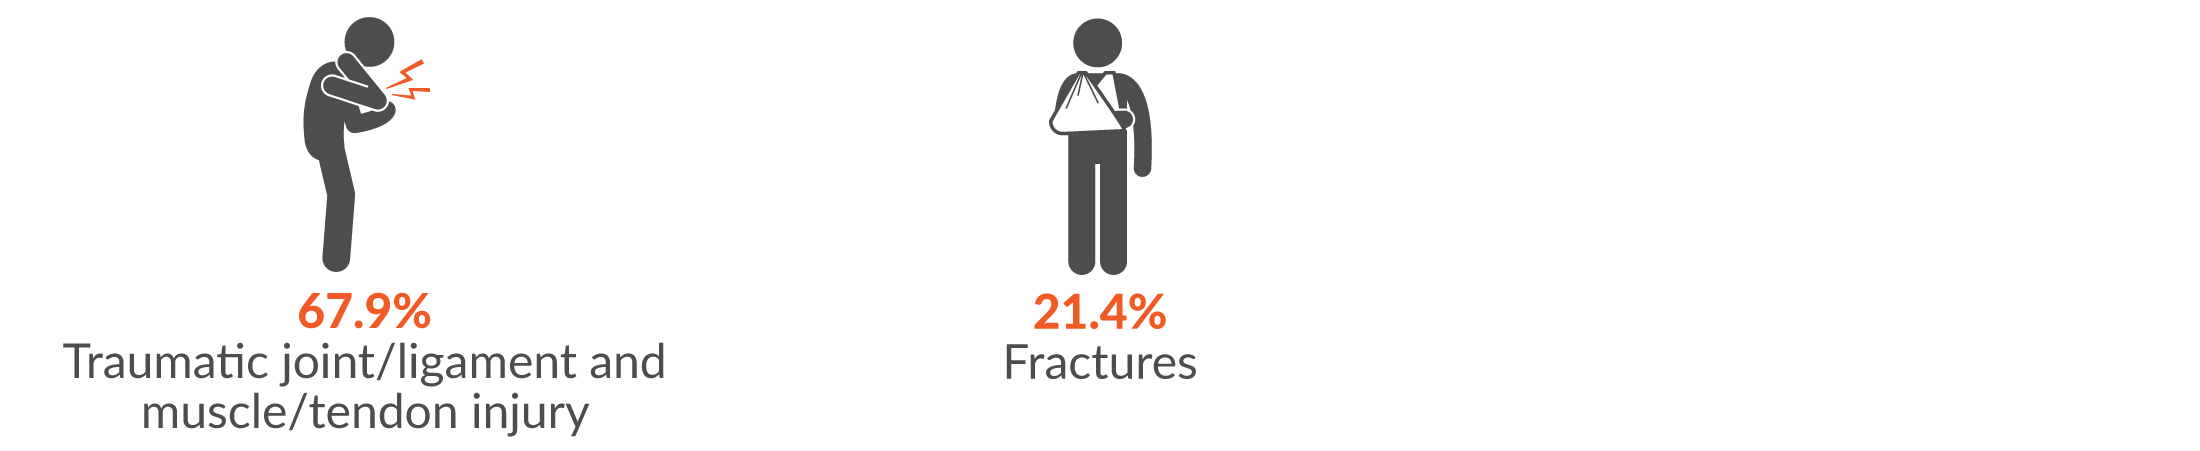 67.9% traumatic joint/ligament and muscle/tendon injury; and 21.4% fractures.